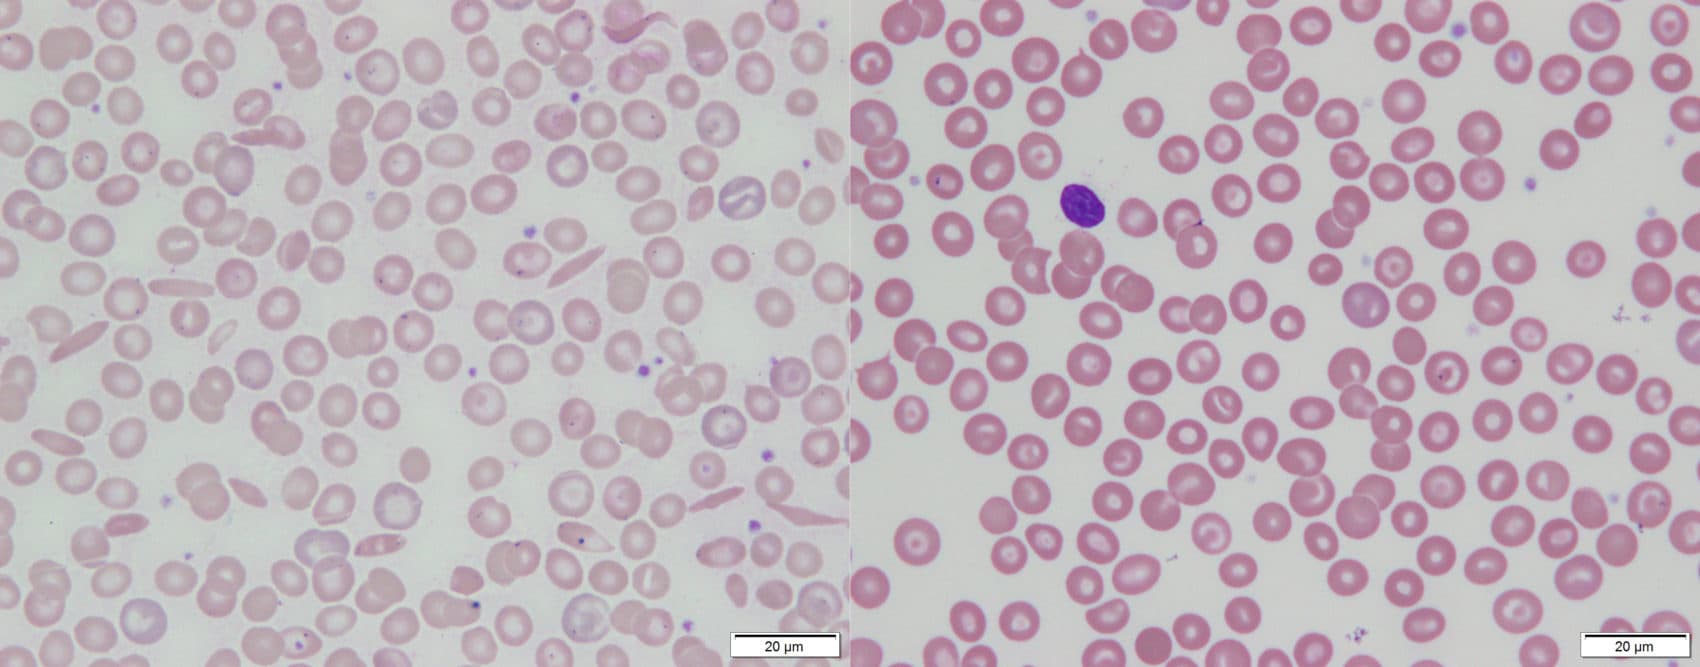 Manny Johnson's blood images. The left image shows how some of his red blood cells were &quot;sickled.&quot; On the right is a more recent picture, after his gene therapy. All his red blood cells look round and healthy.